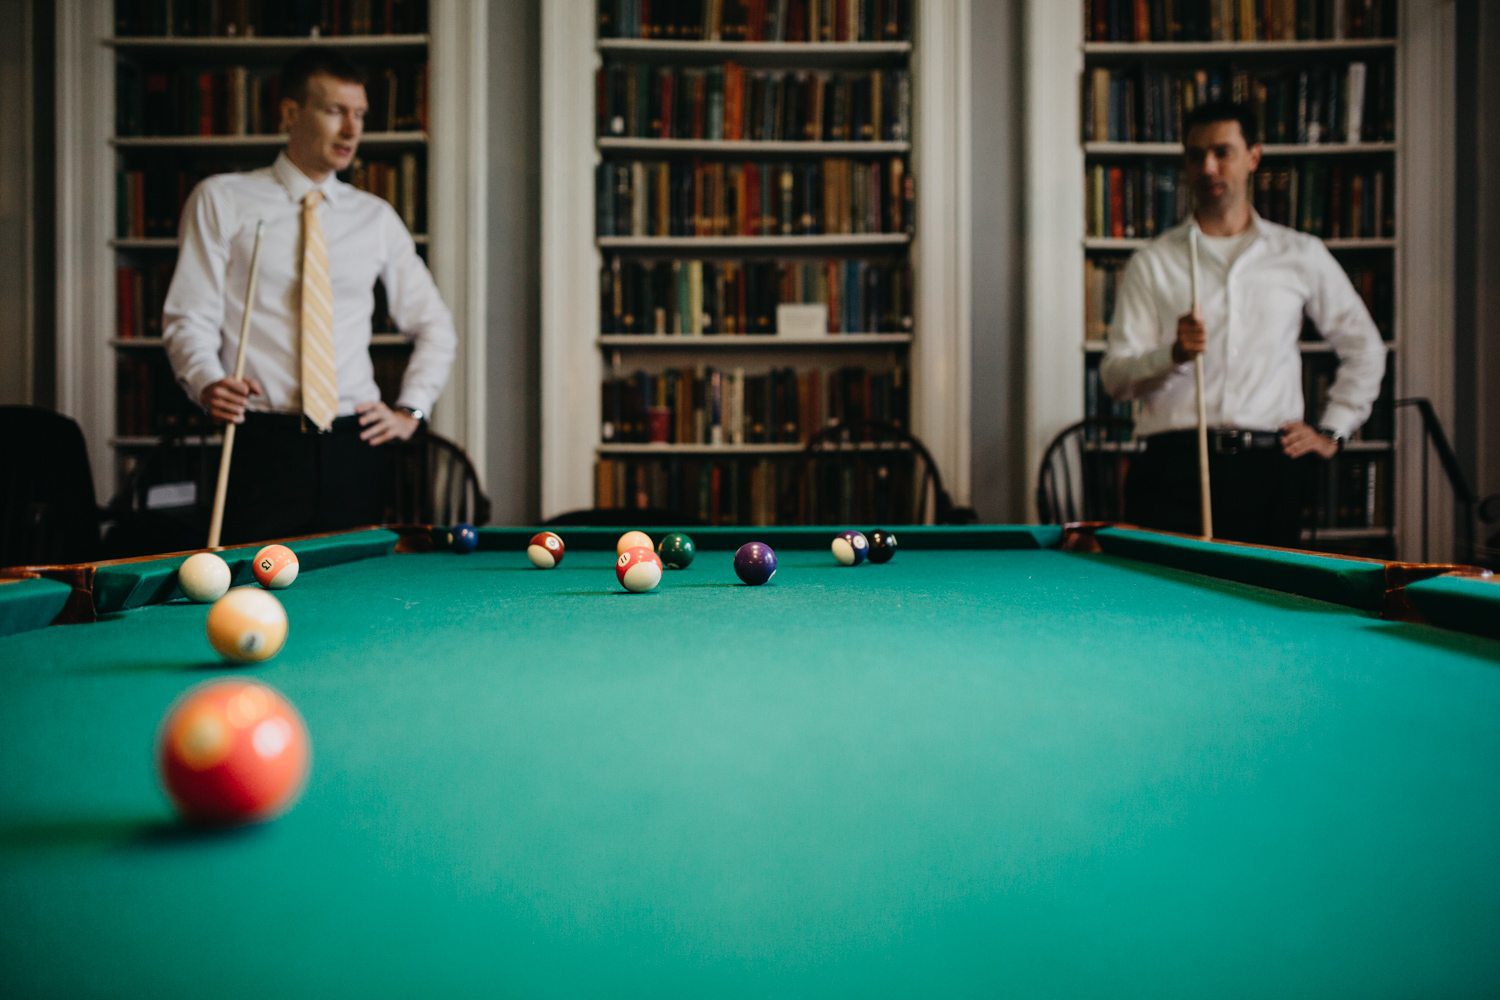 Two men playing billiards at the Cosmos Club in Washington DC.